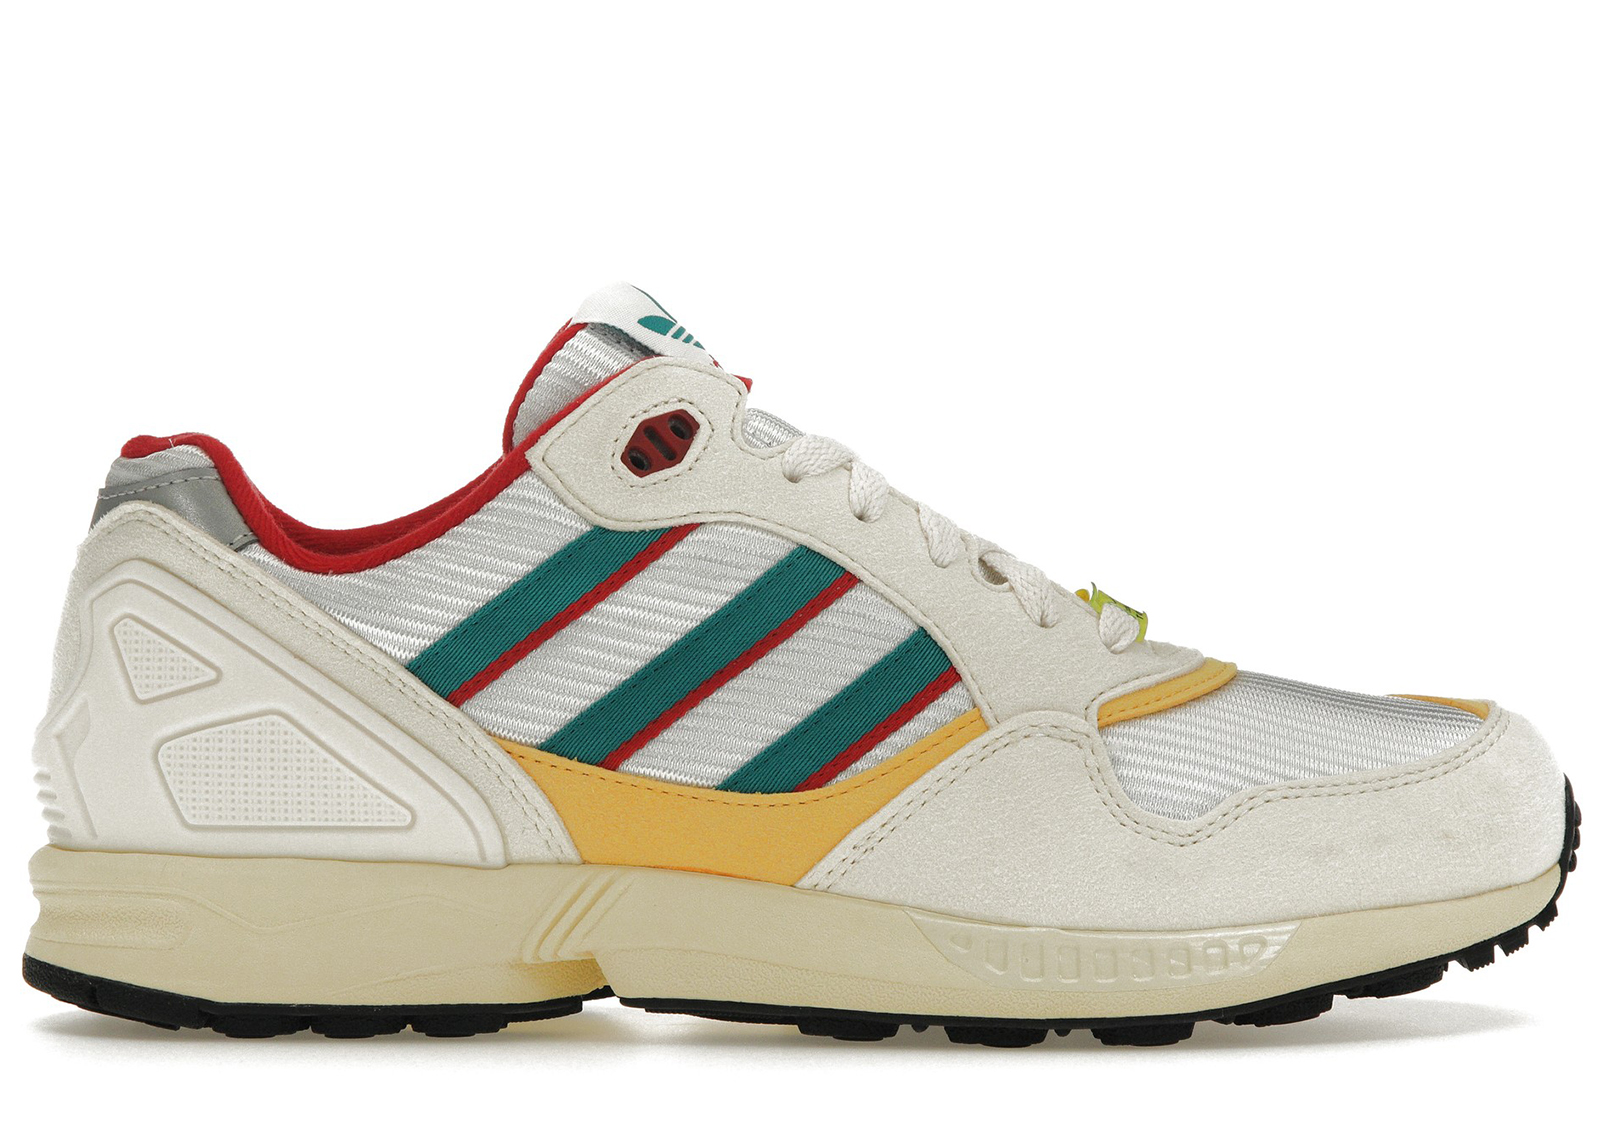 adidas ZX 6000 30 Years of Torsion